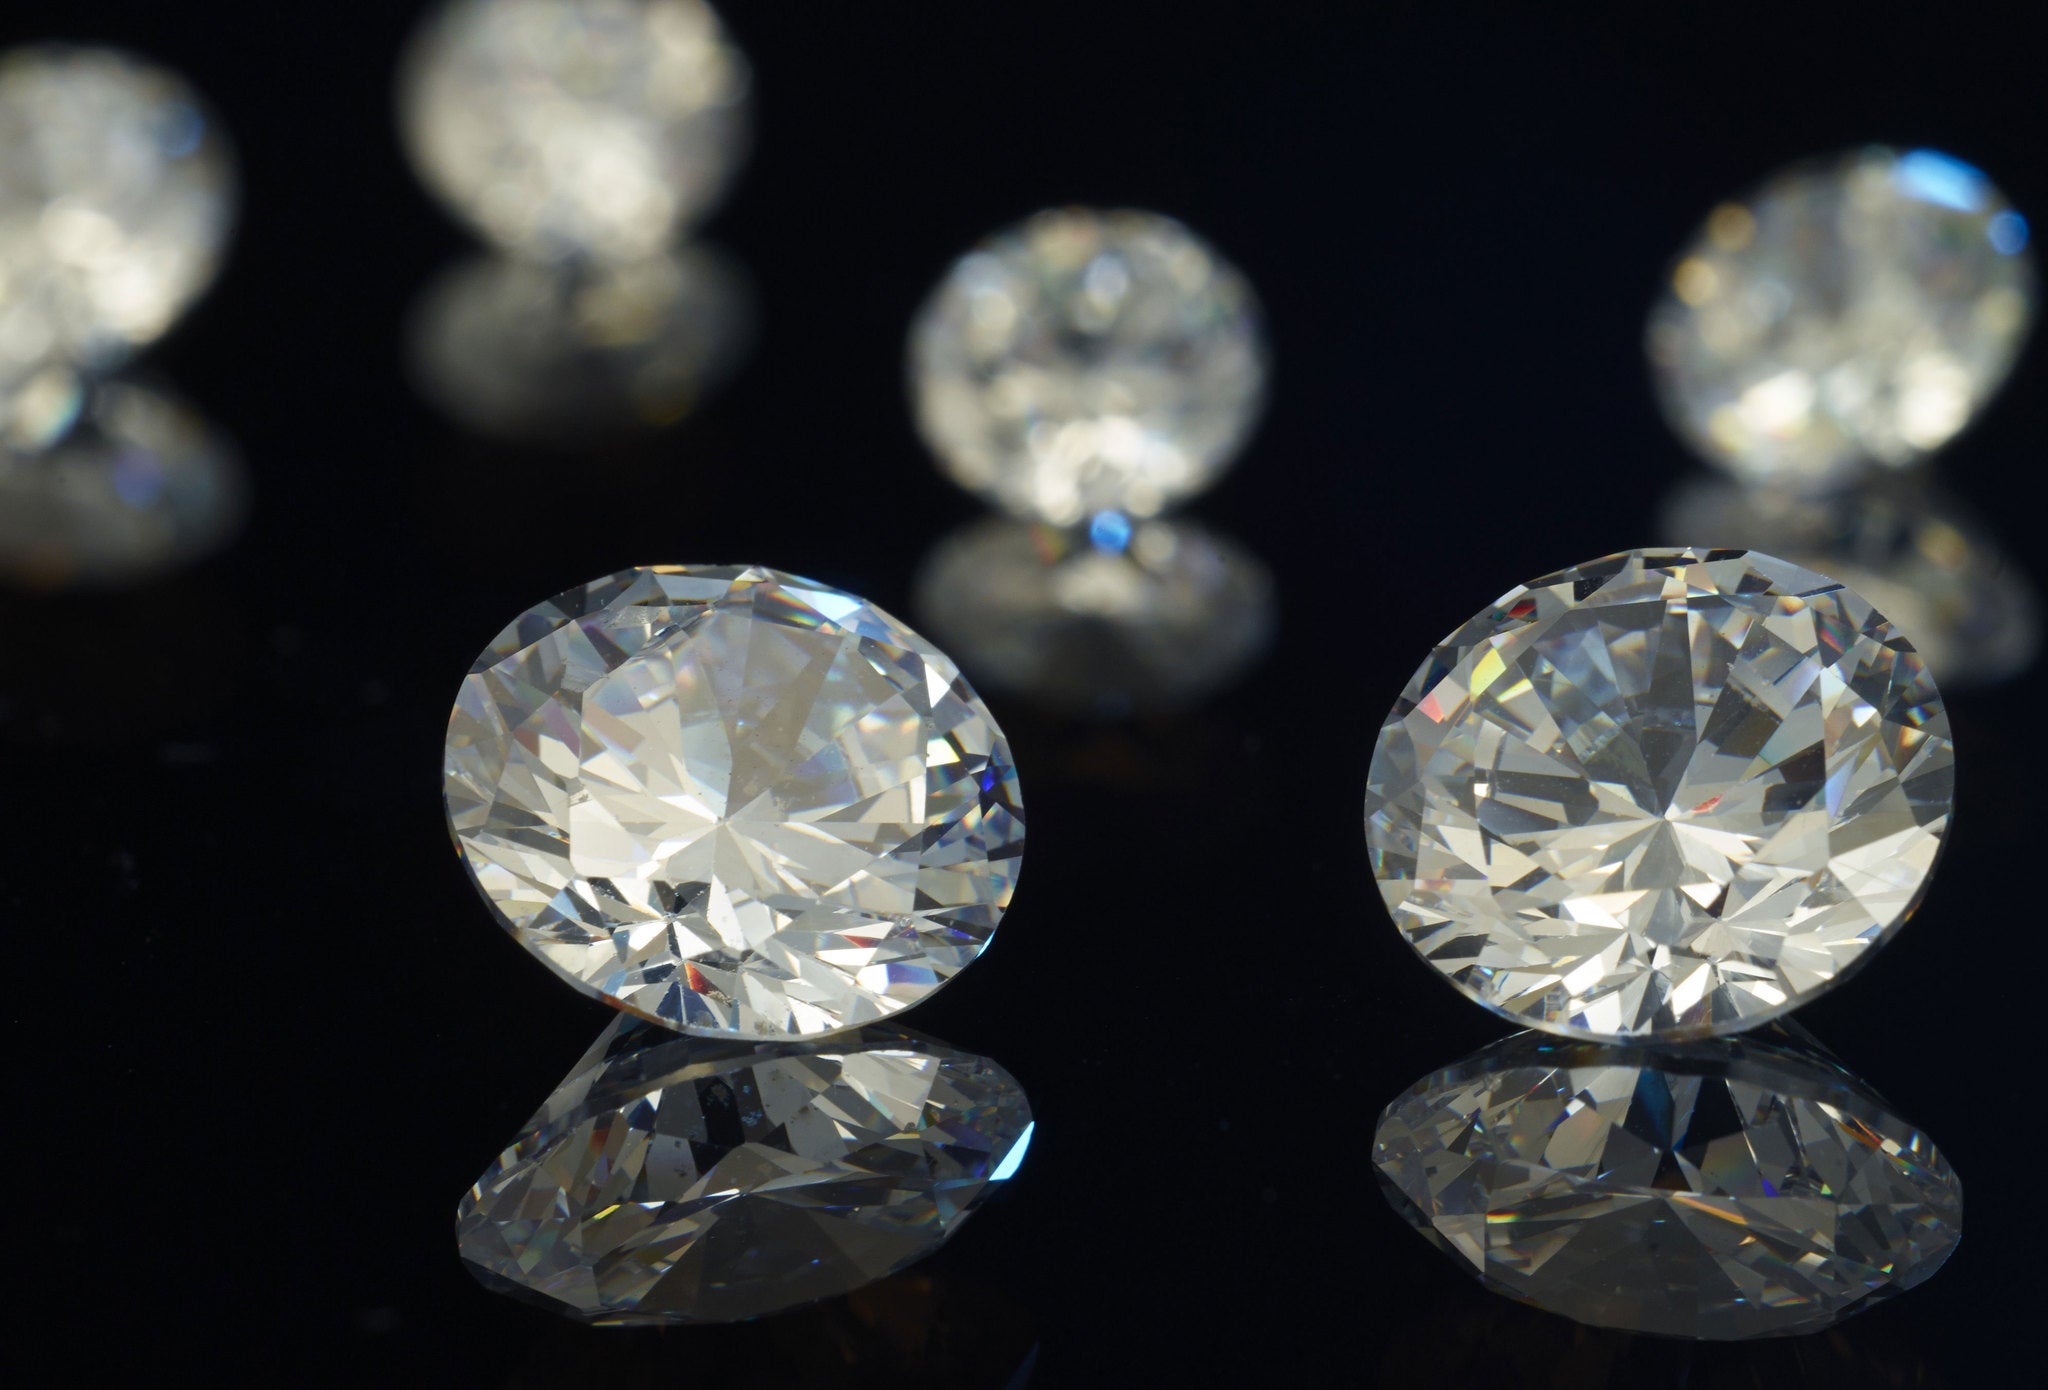 Demand for jewellery and diamonds is strong, reports a high-end London auction source